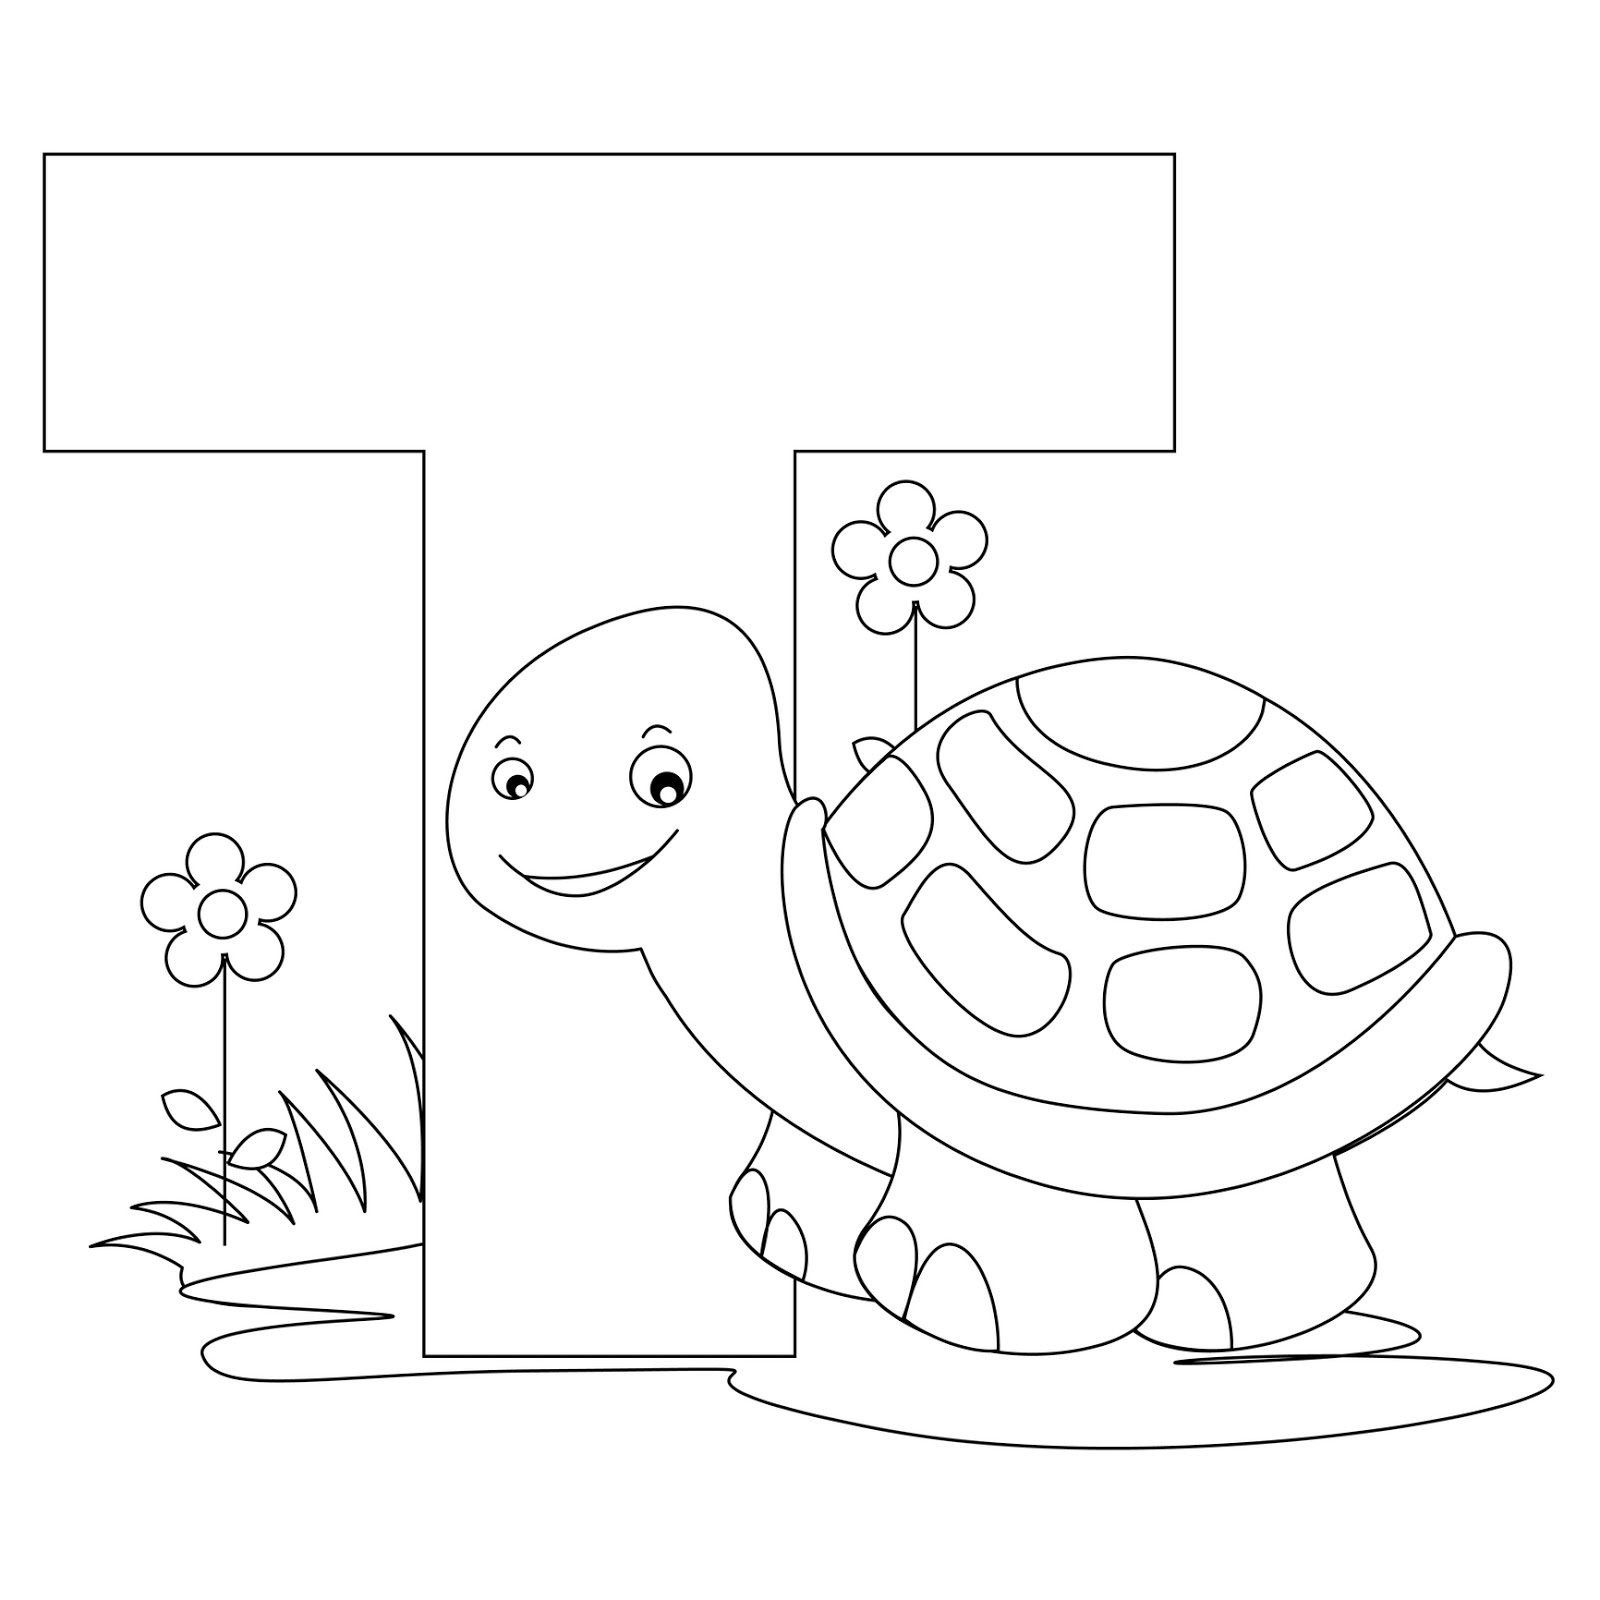 Animal Alphabet Letter T coloring - Turtle coloring ~ Child Coloring